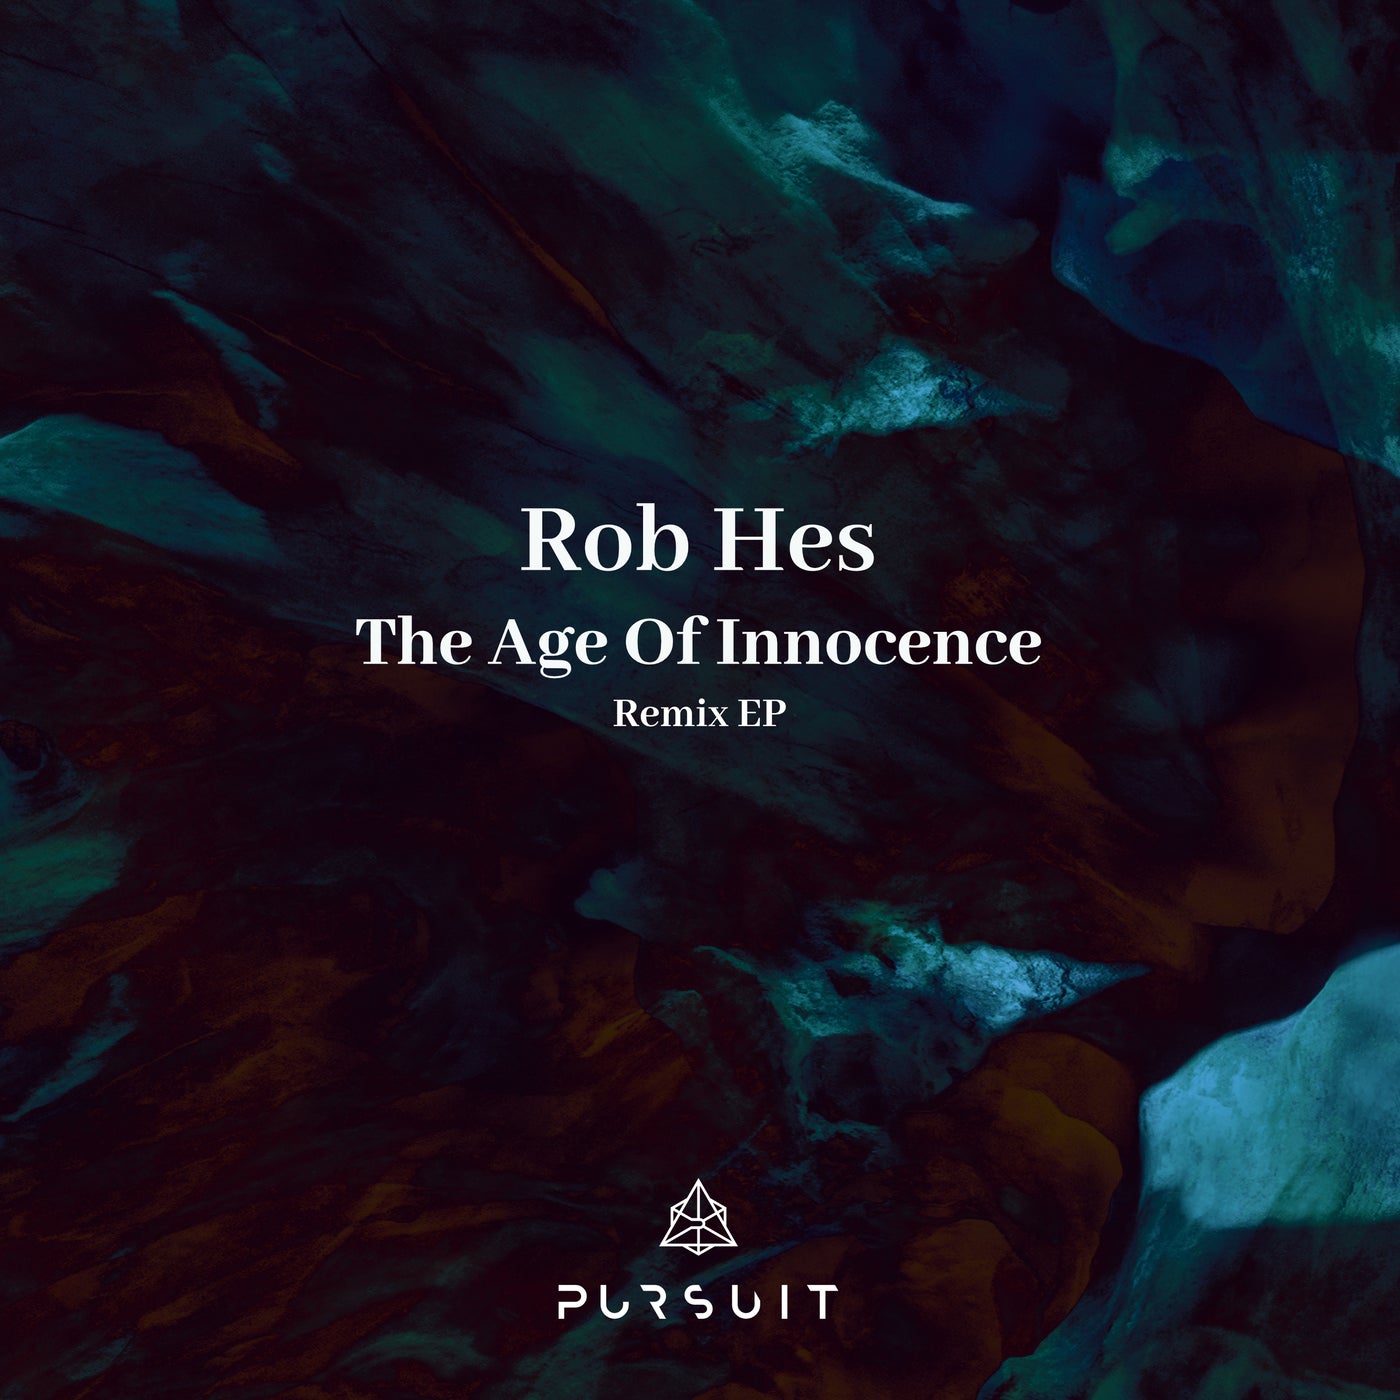 Rob Hes – The Age Of Innocence Remix EP [PRST054]